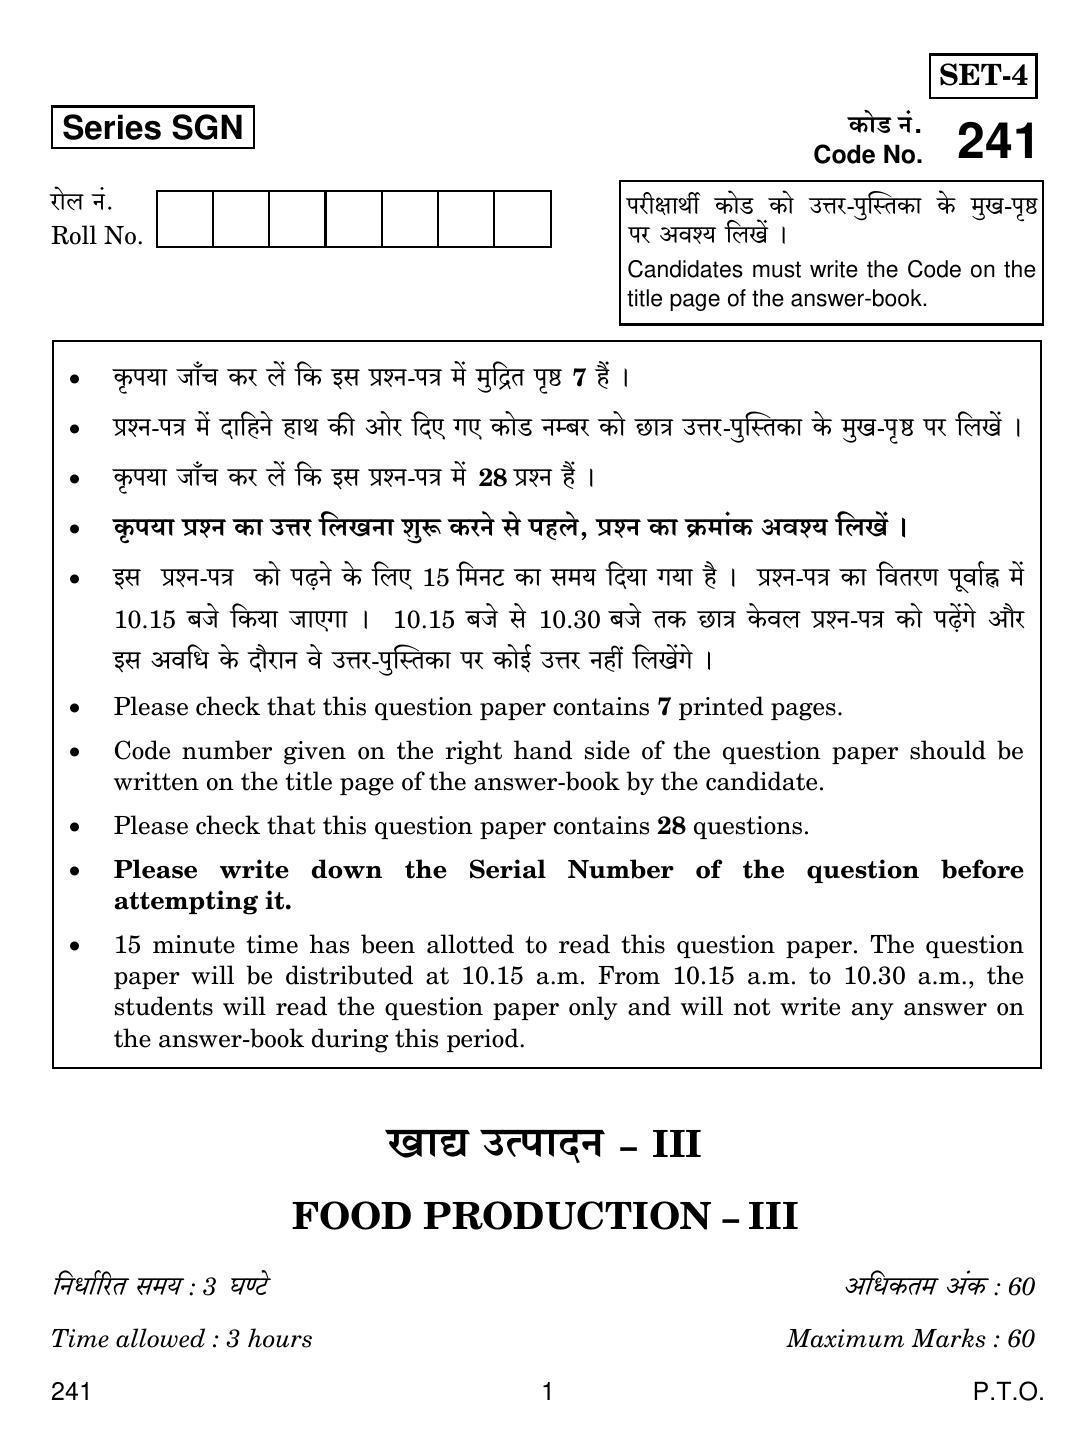 CBSE Class 12 241 FOOD PRODUCTION III 2018 Question Paper - Page 1